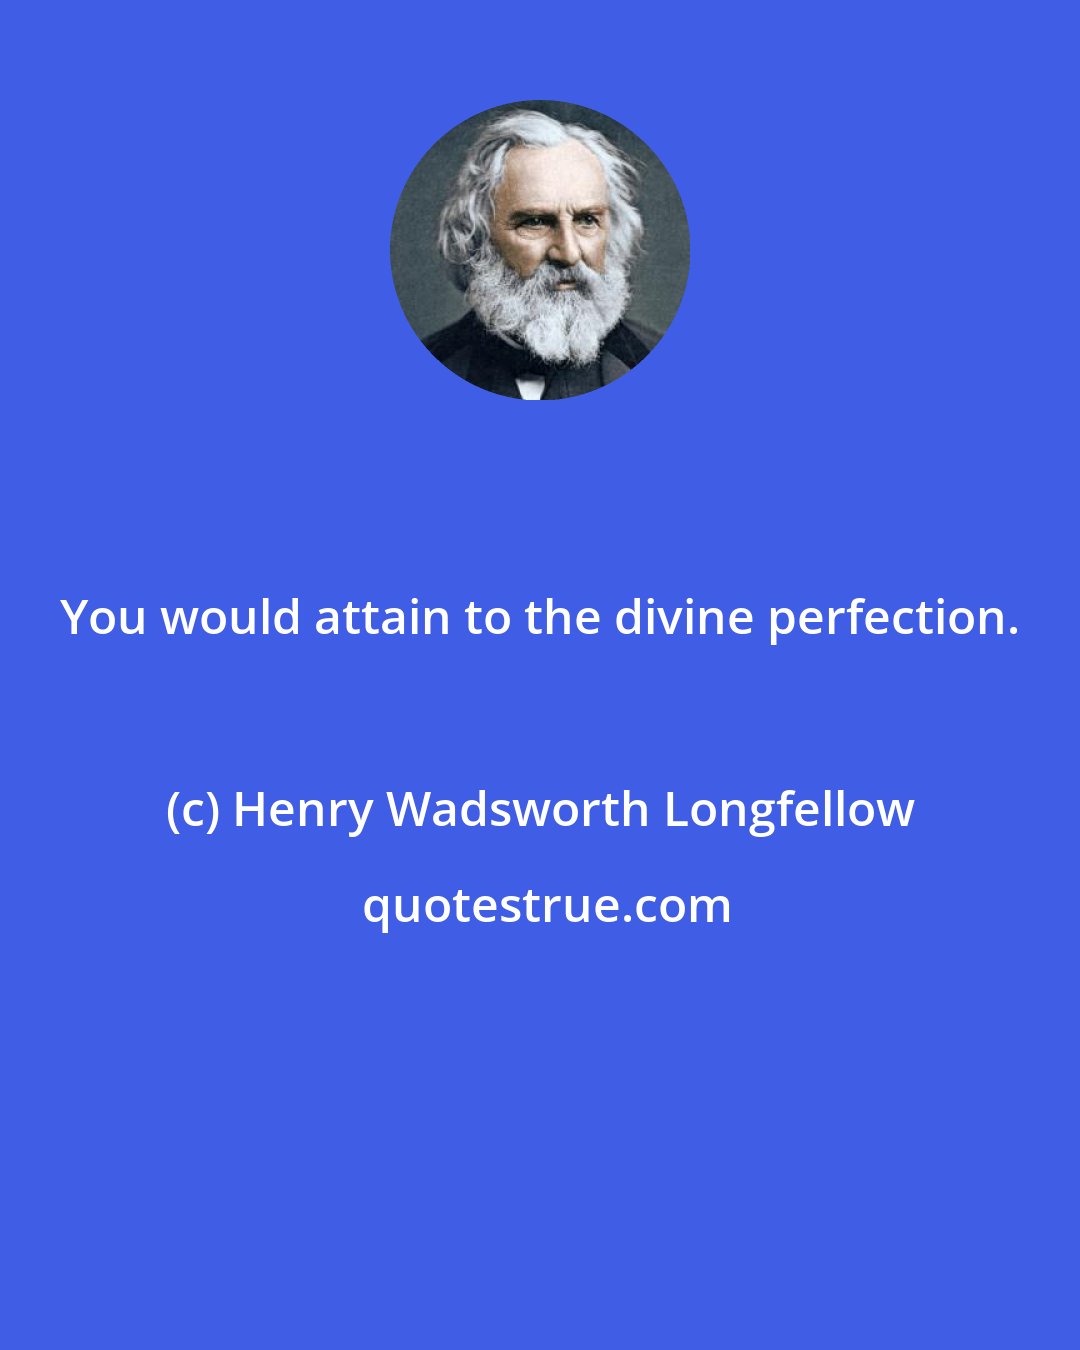 Henry Wadsworth Longfellow: You would attain to the divine perfection.